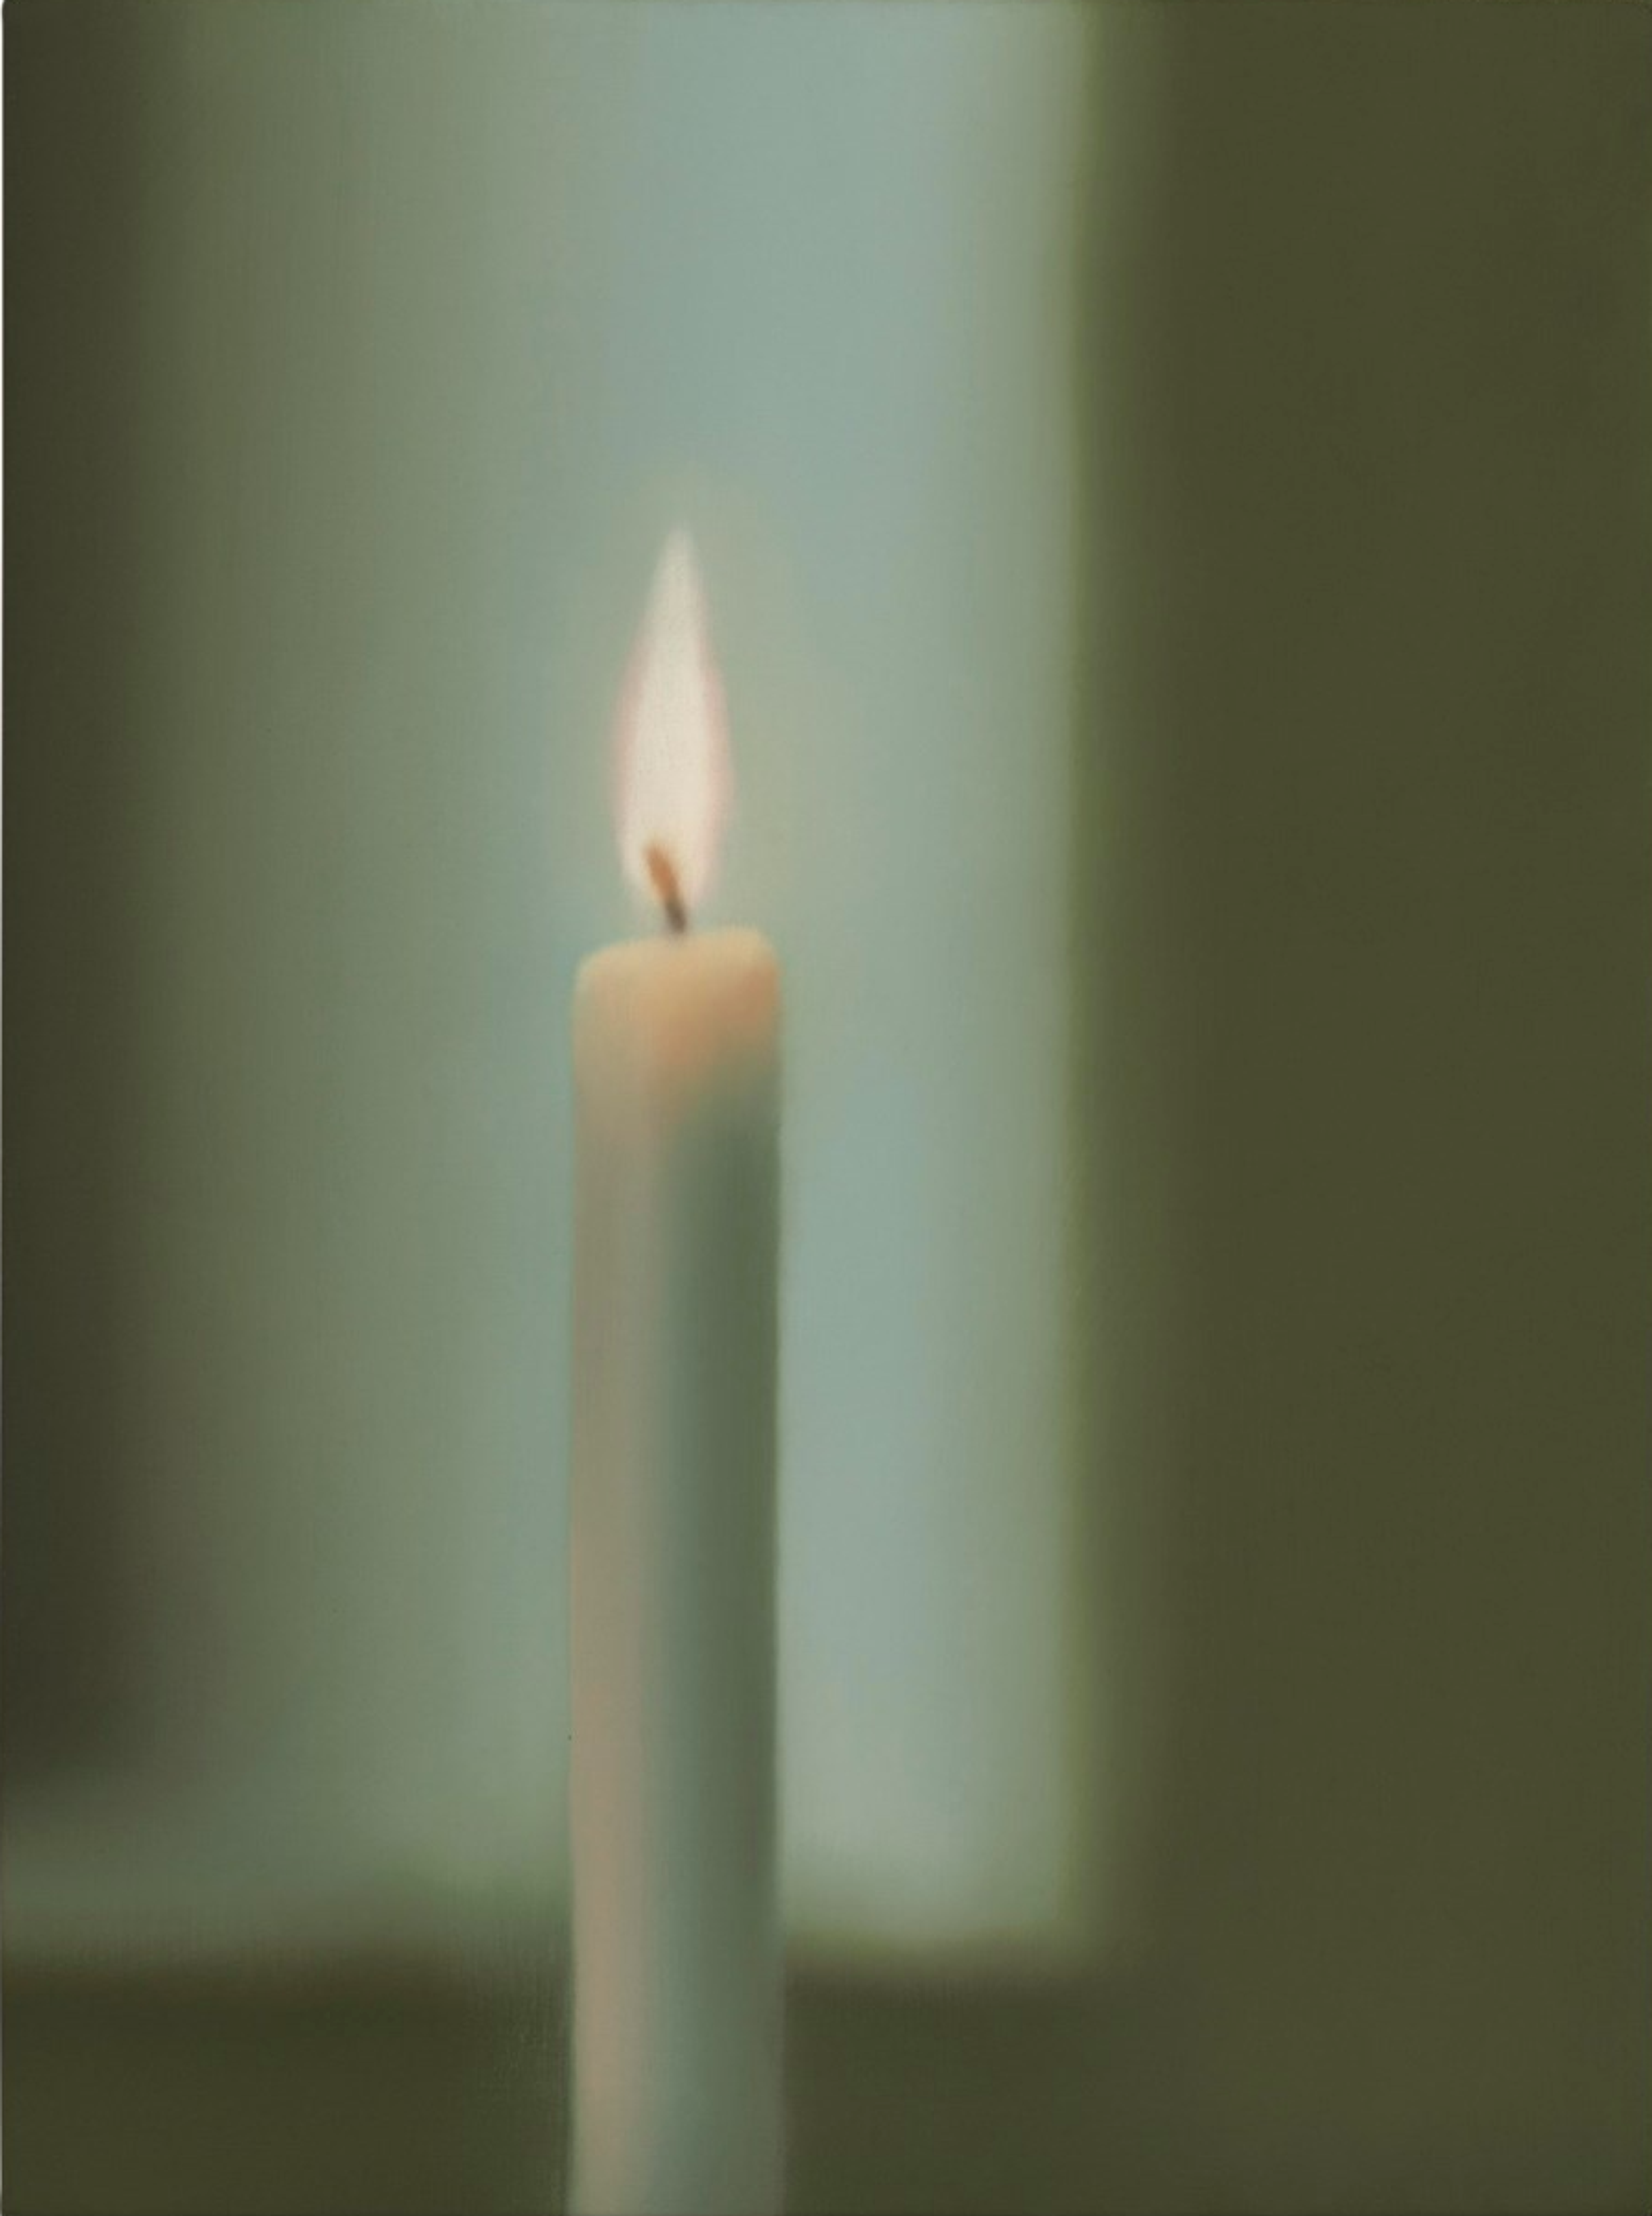 Painting by Gerhard Richter resembling a blurry photograph of an ivory coloured lit stick candle, standing against a green hued background.